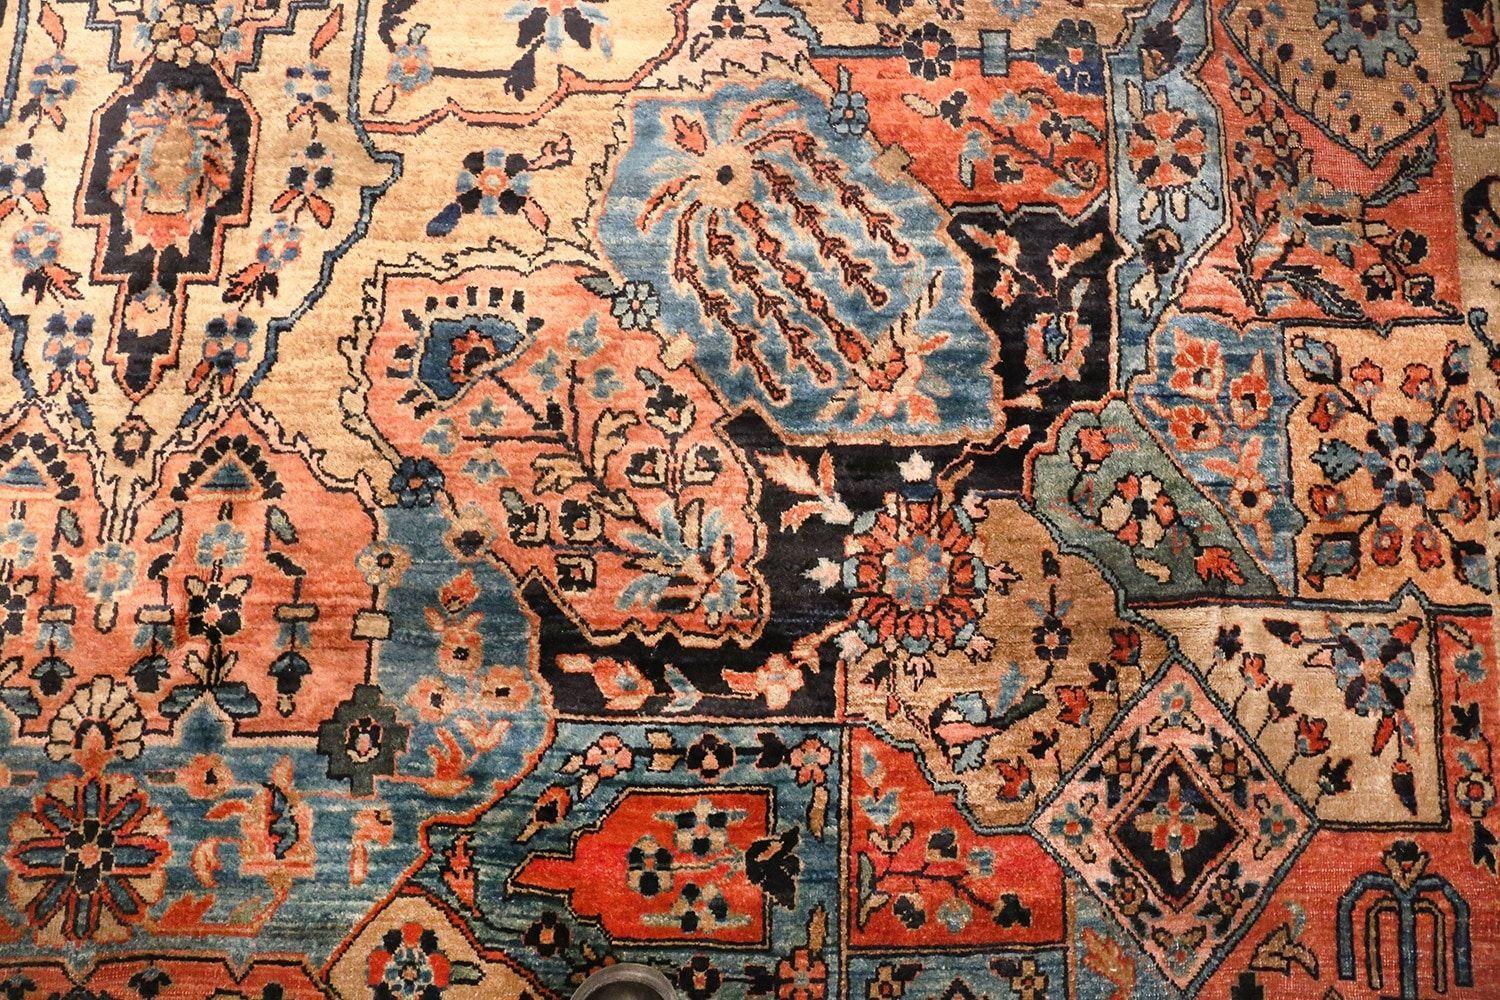 Hand-Knotted Room Size Antique Persian Sarouk Carpet